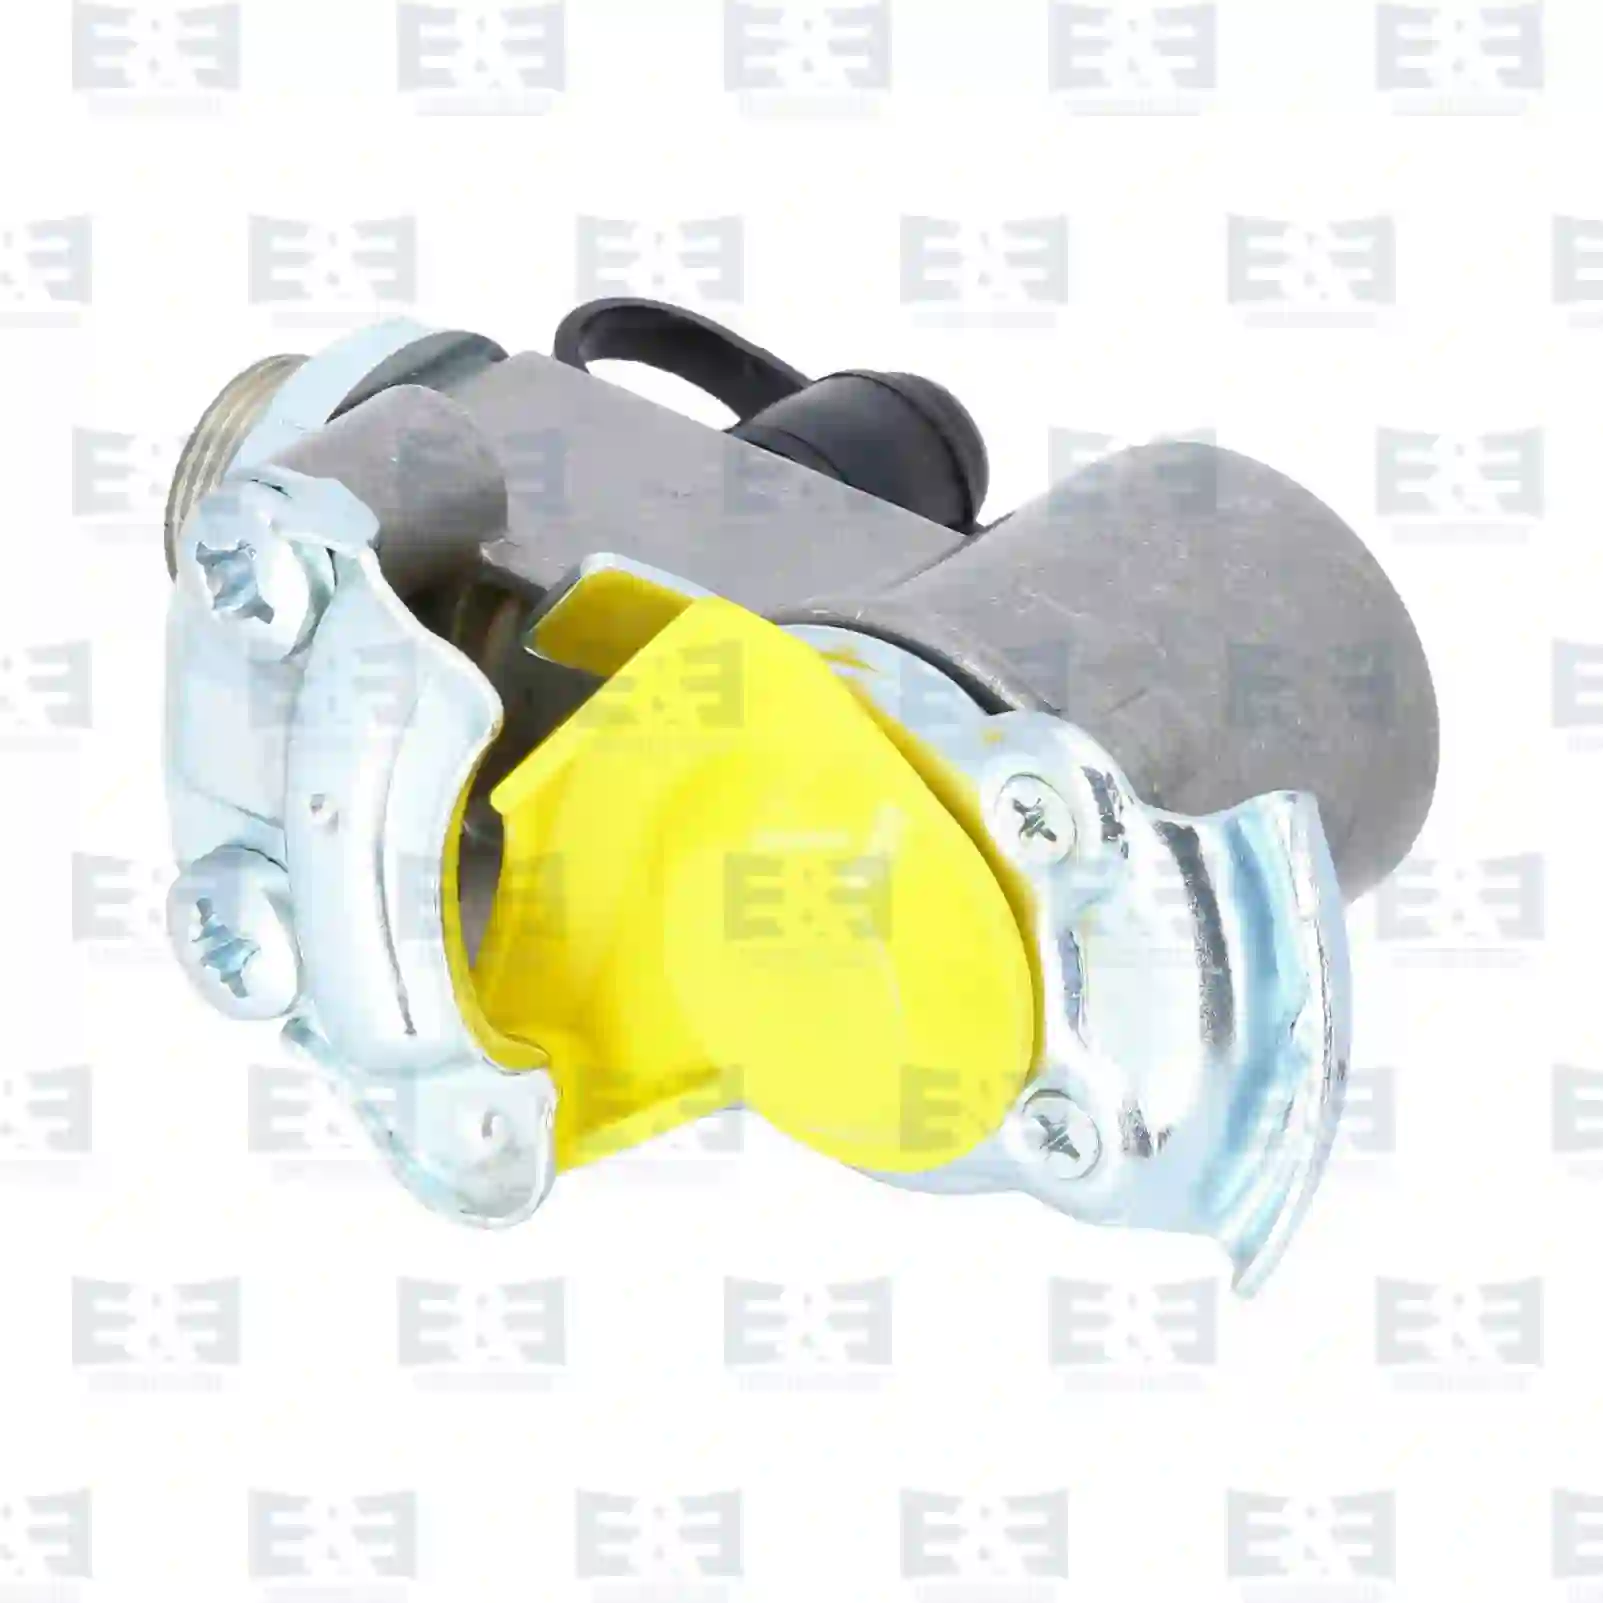  Palm coupling, yellow lid, pipe filter || E&E Truck Spare Parts | Truck Spare Parts, Auotomotive Spare Parts